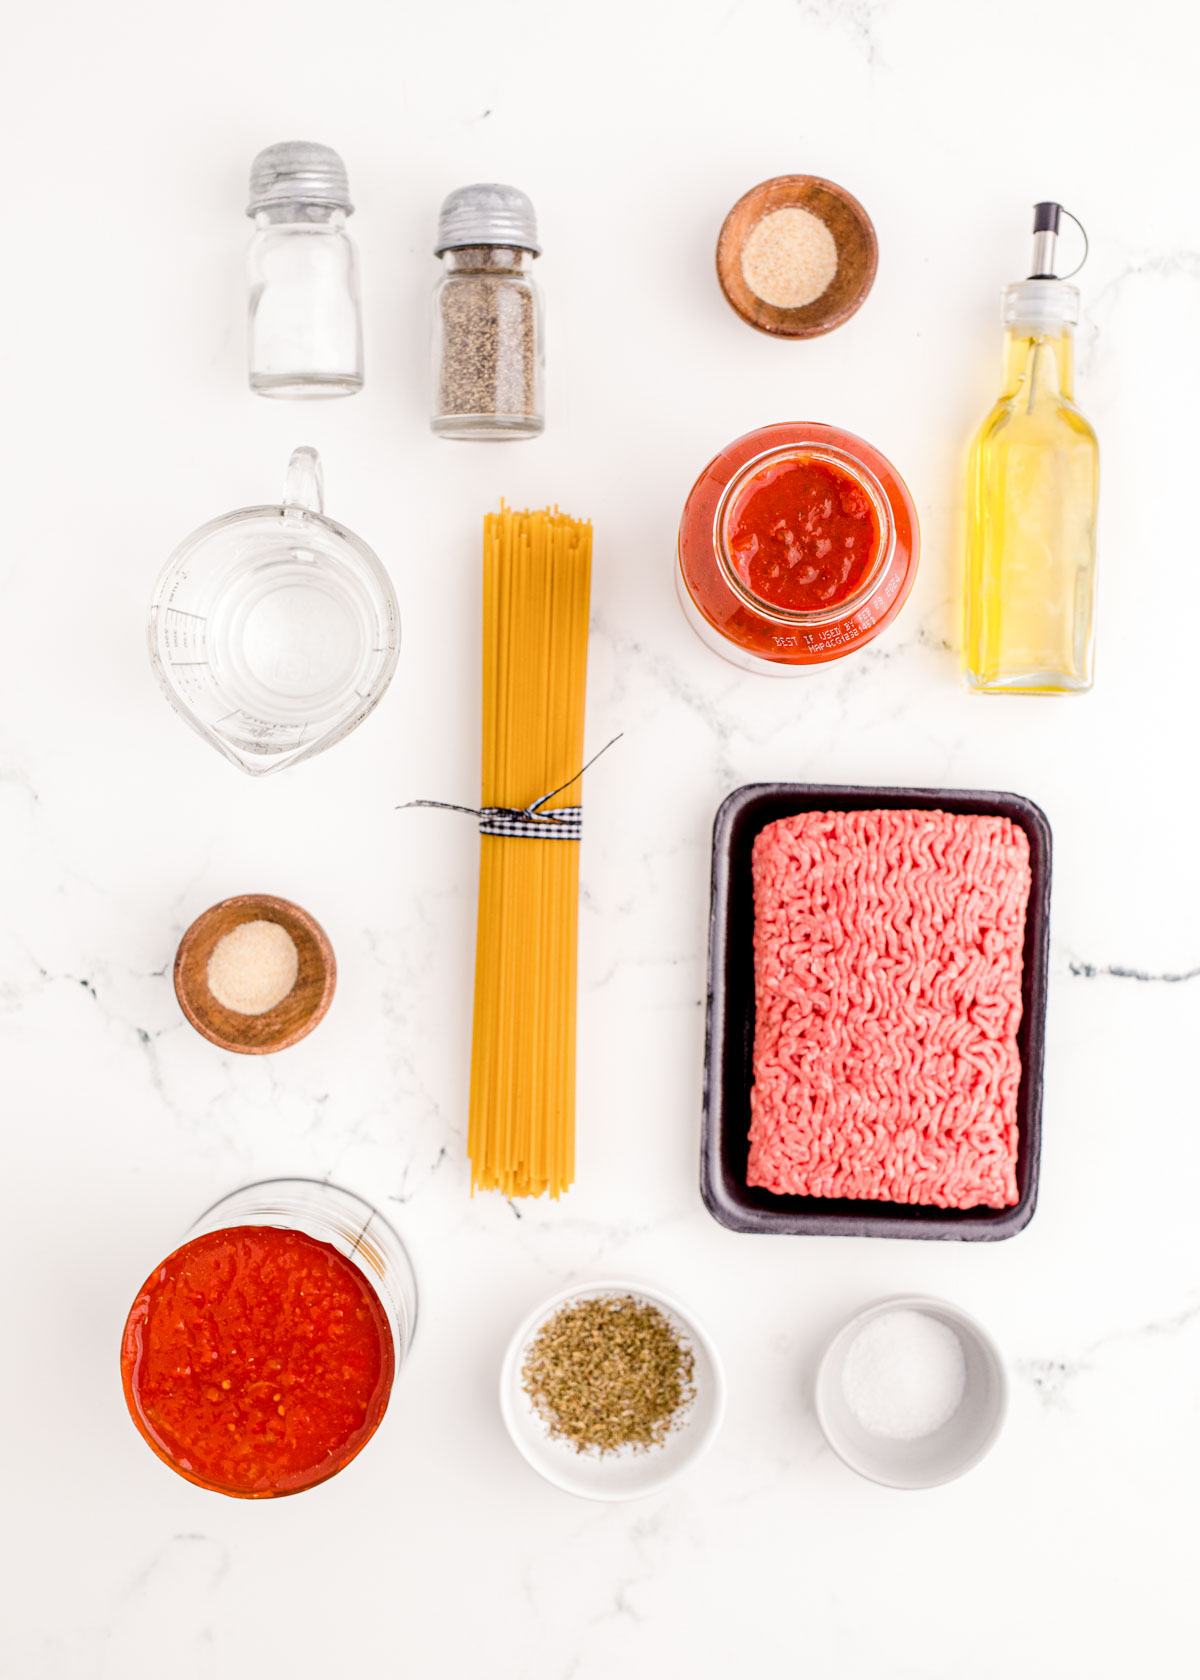 Ingredients to make spaghetti with meat sauce on a white table.